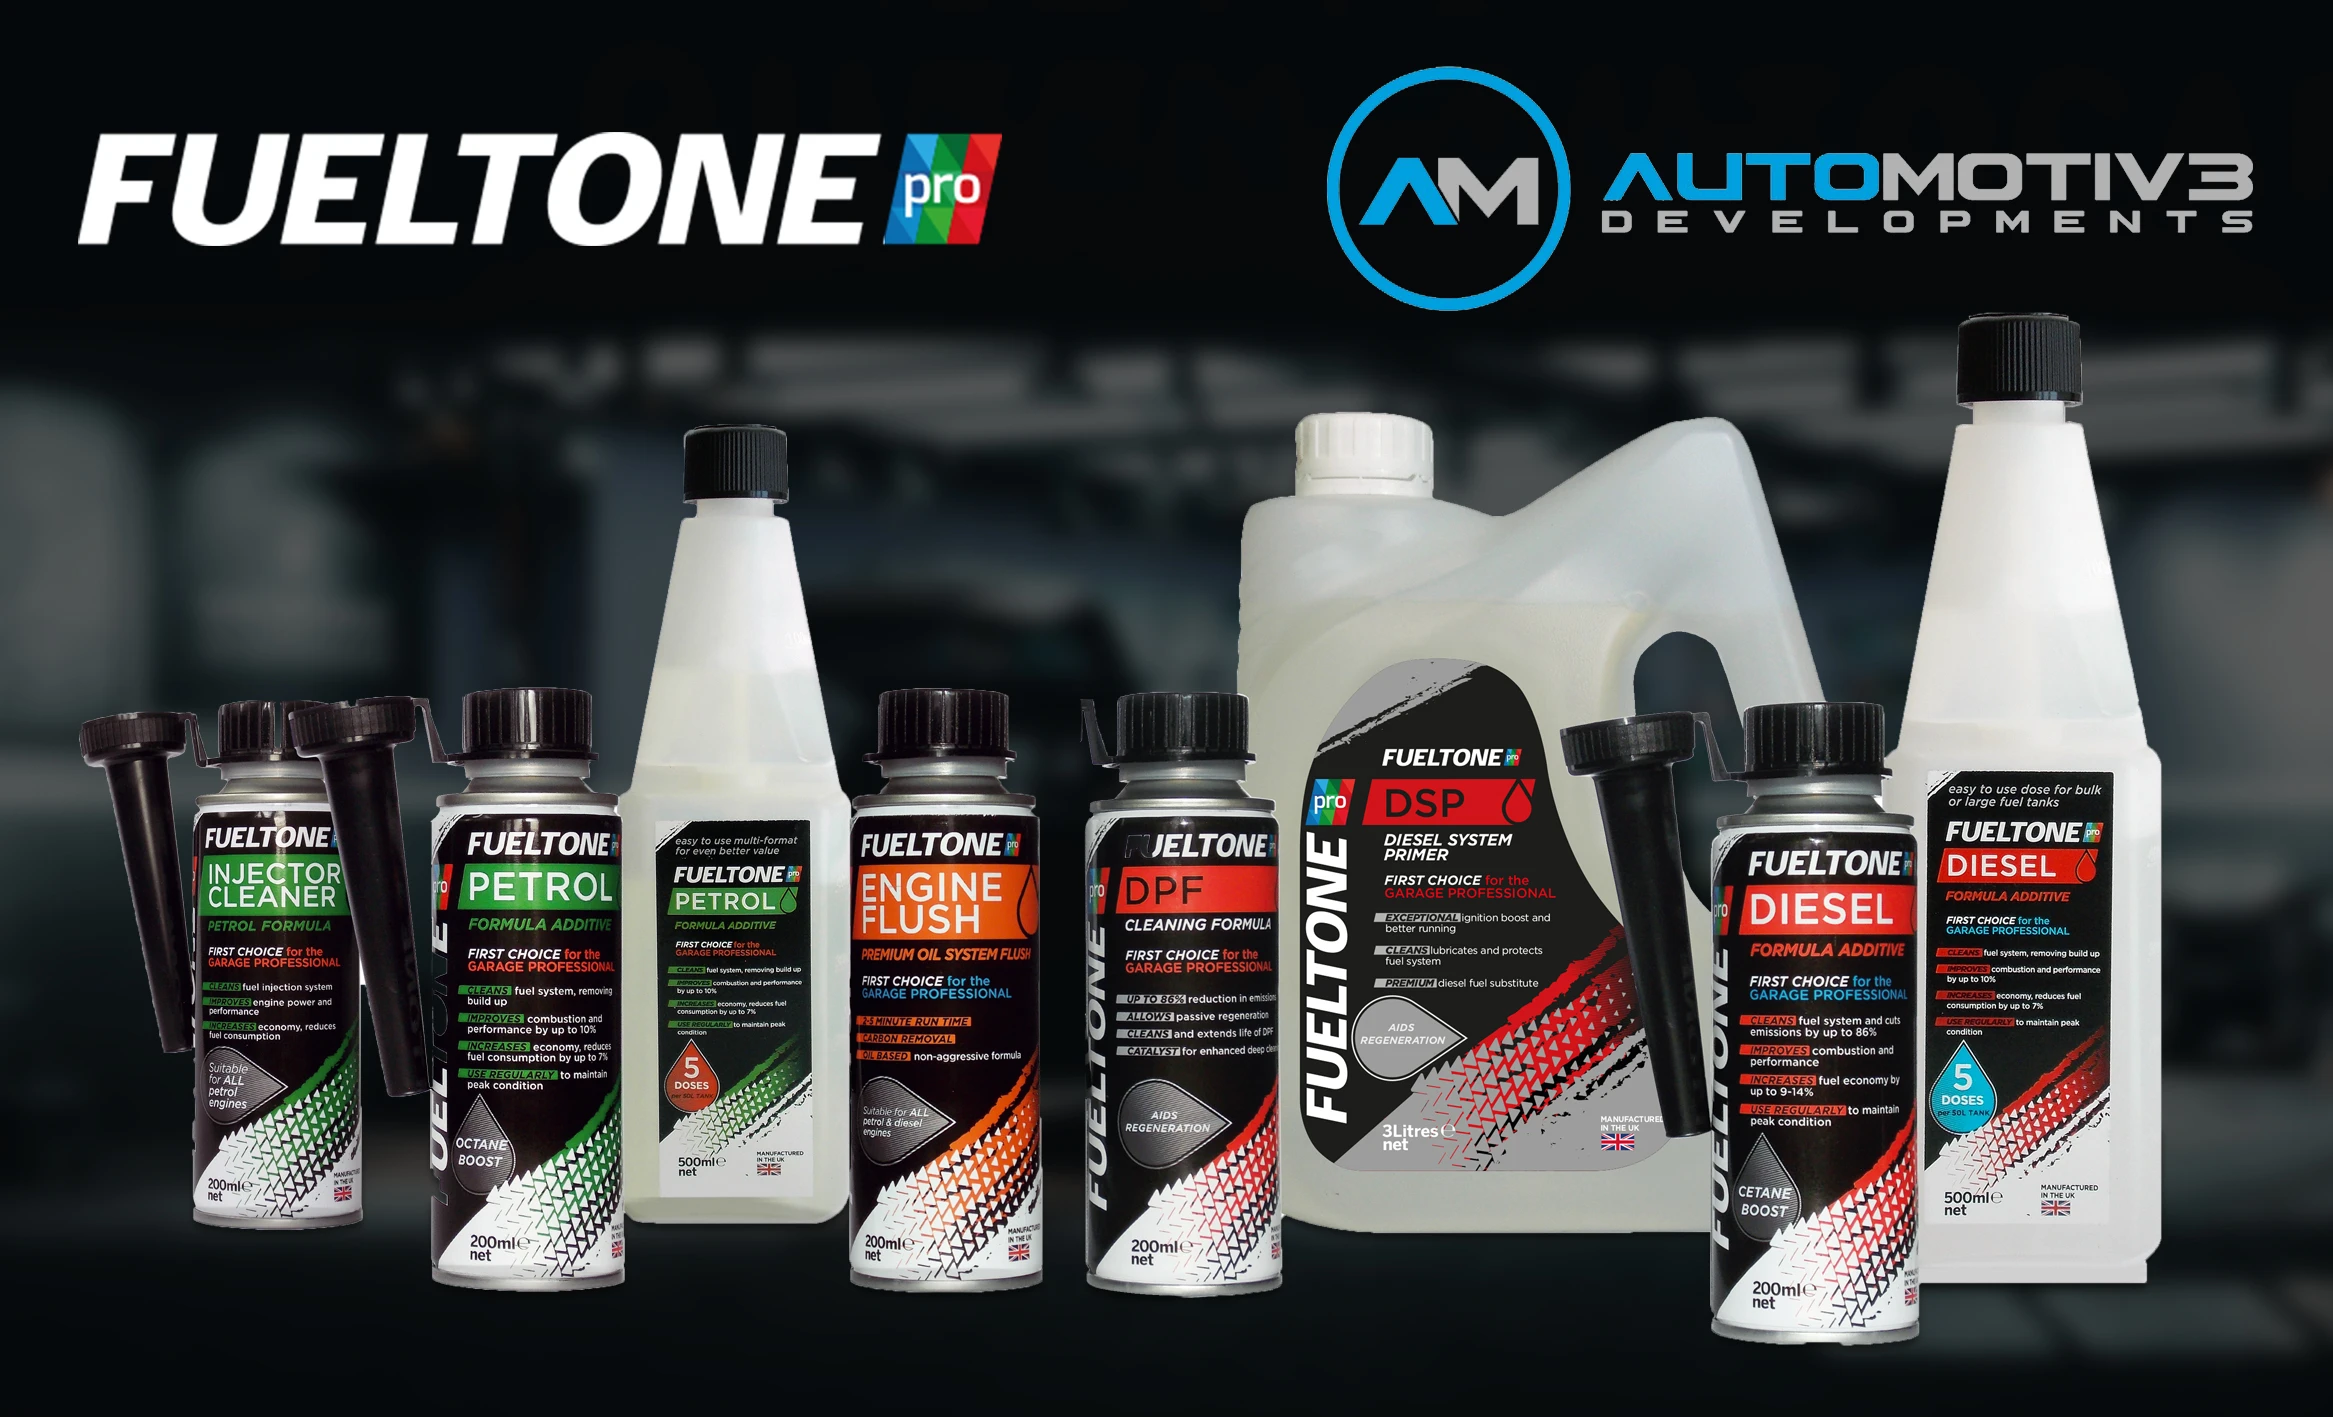 We are now official distributors of FUELTONE PRO